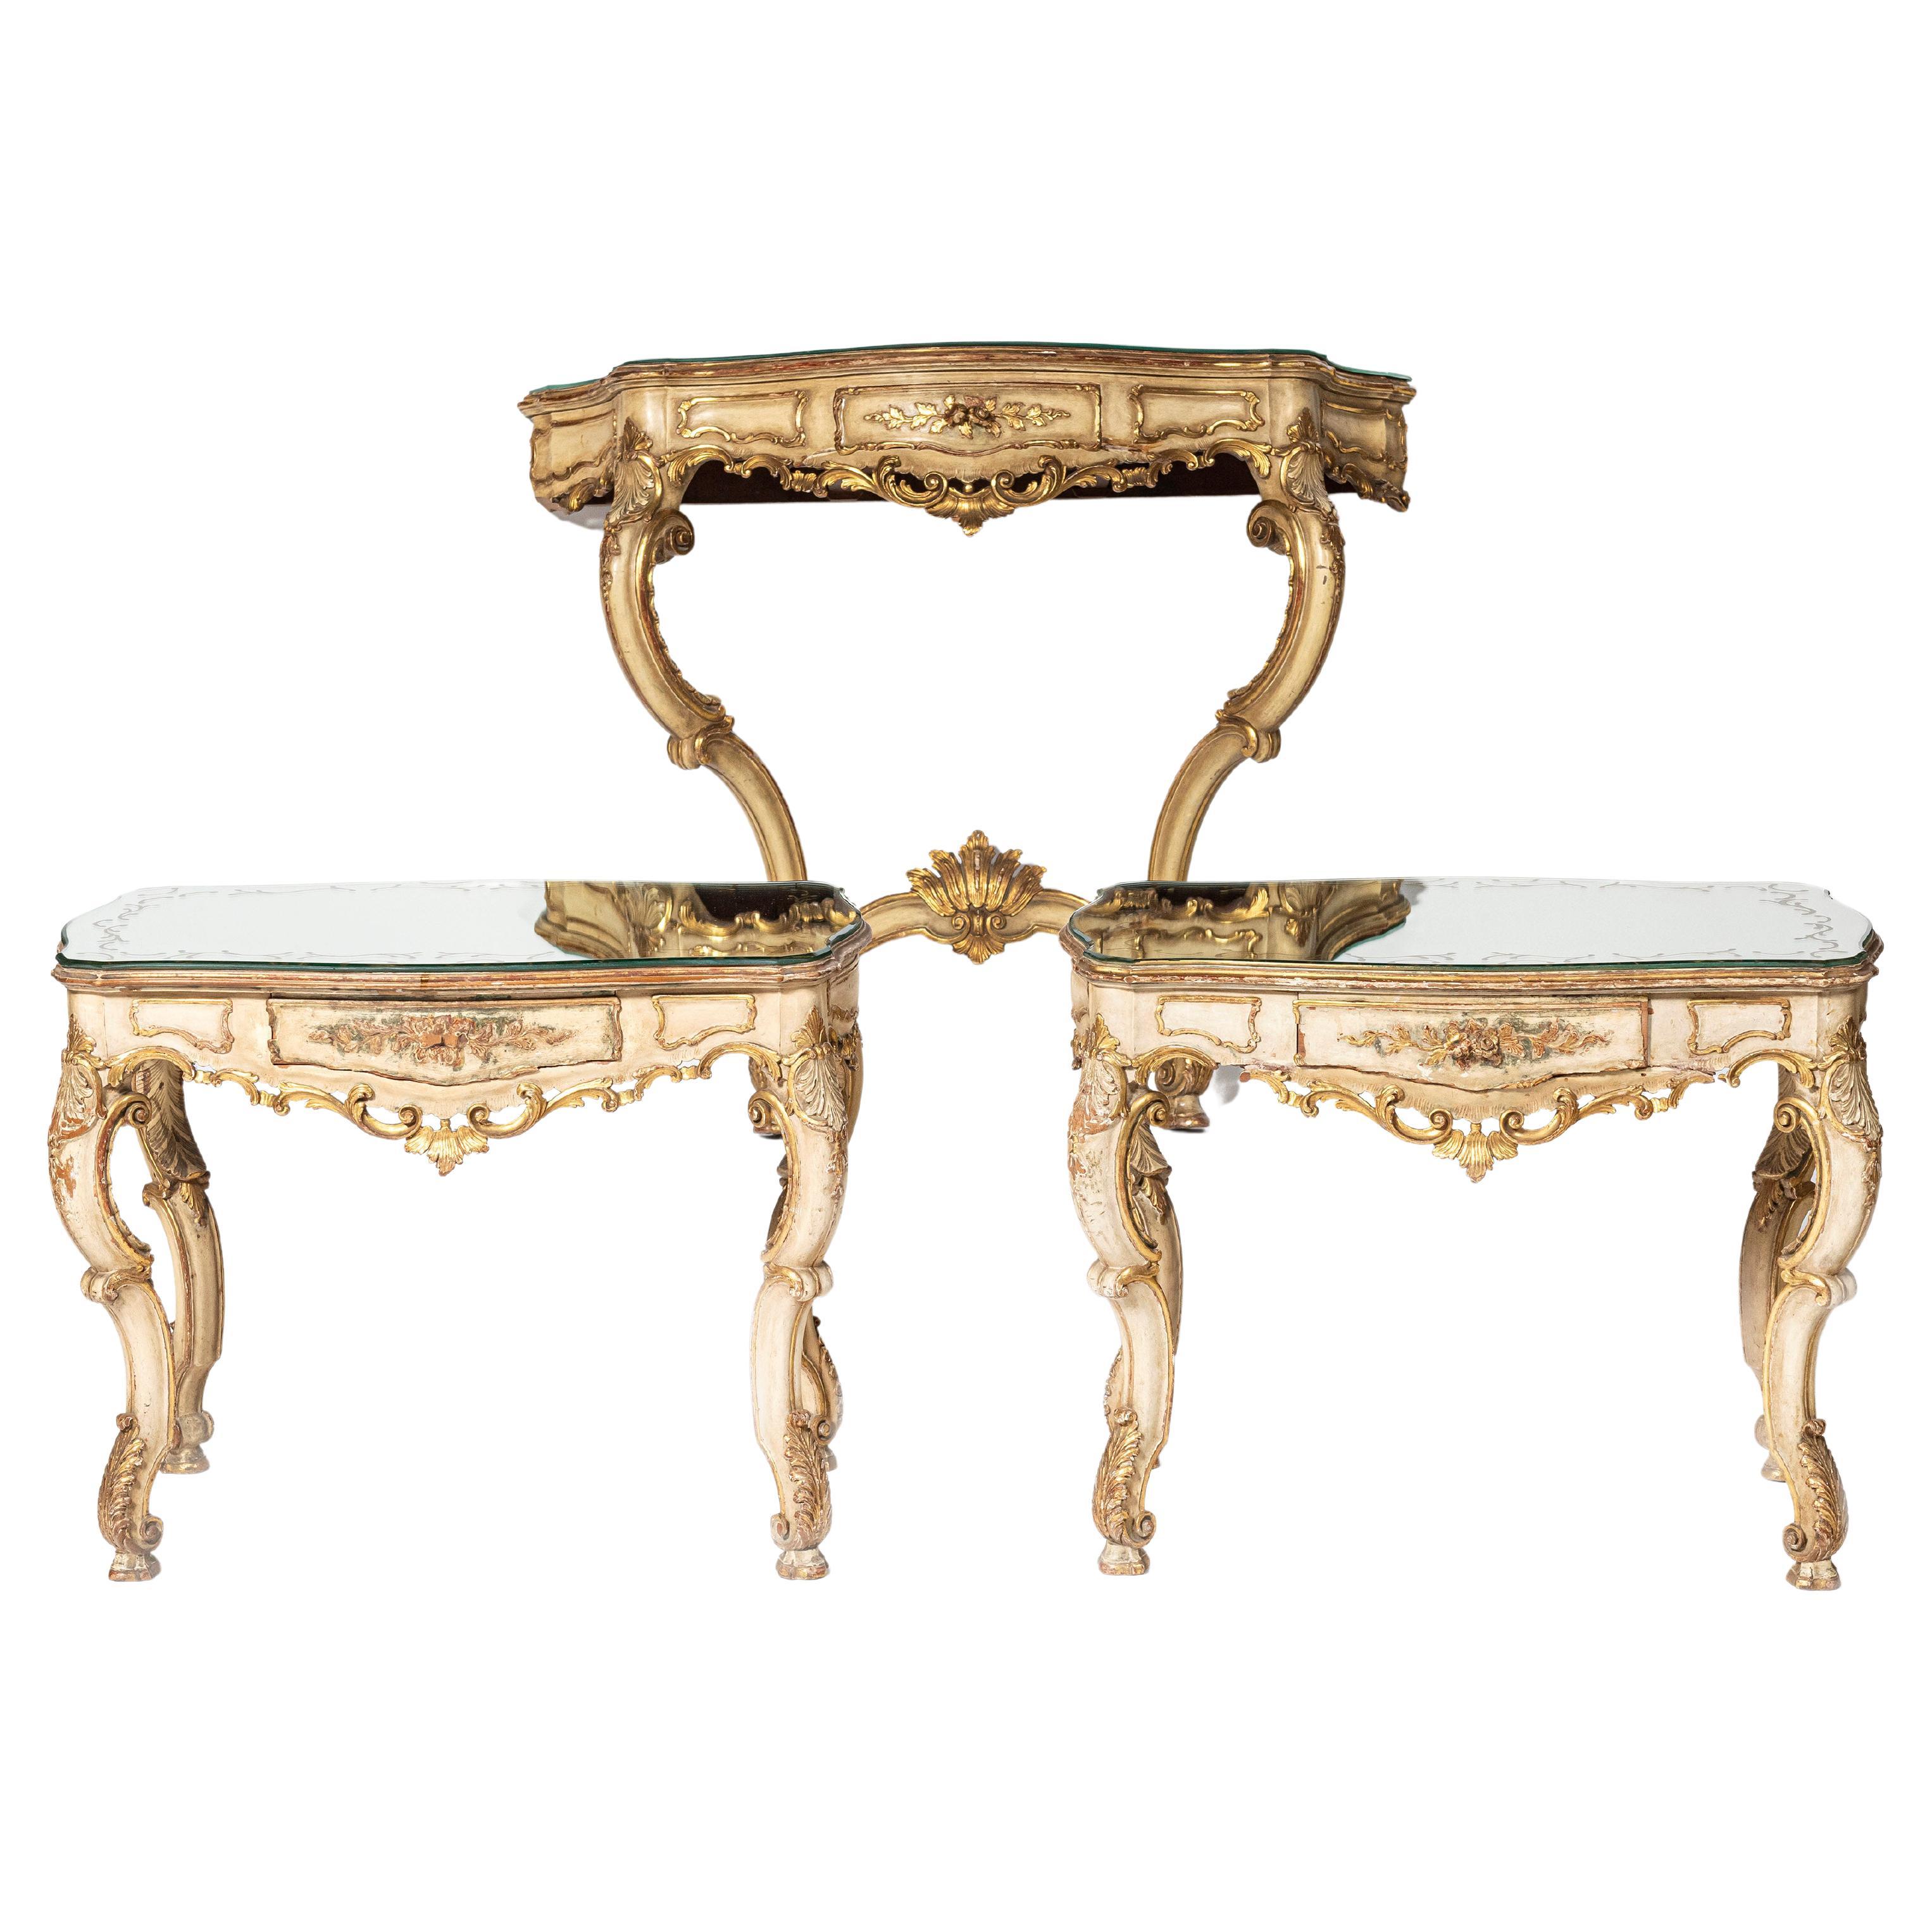 Set of Three Venetian Rococo Pieces, One Console Table and Two Night Sands